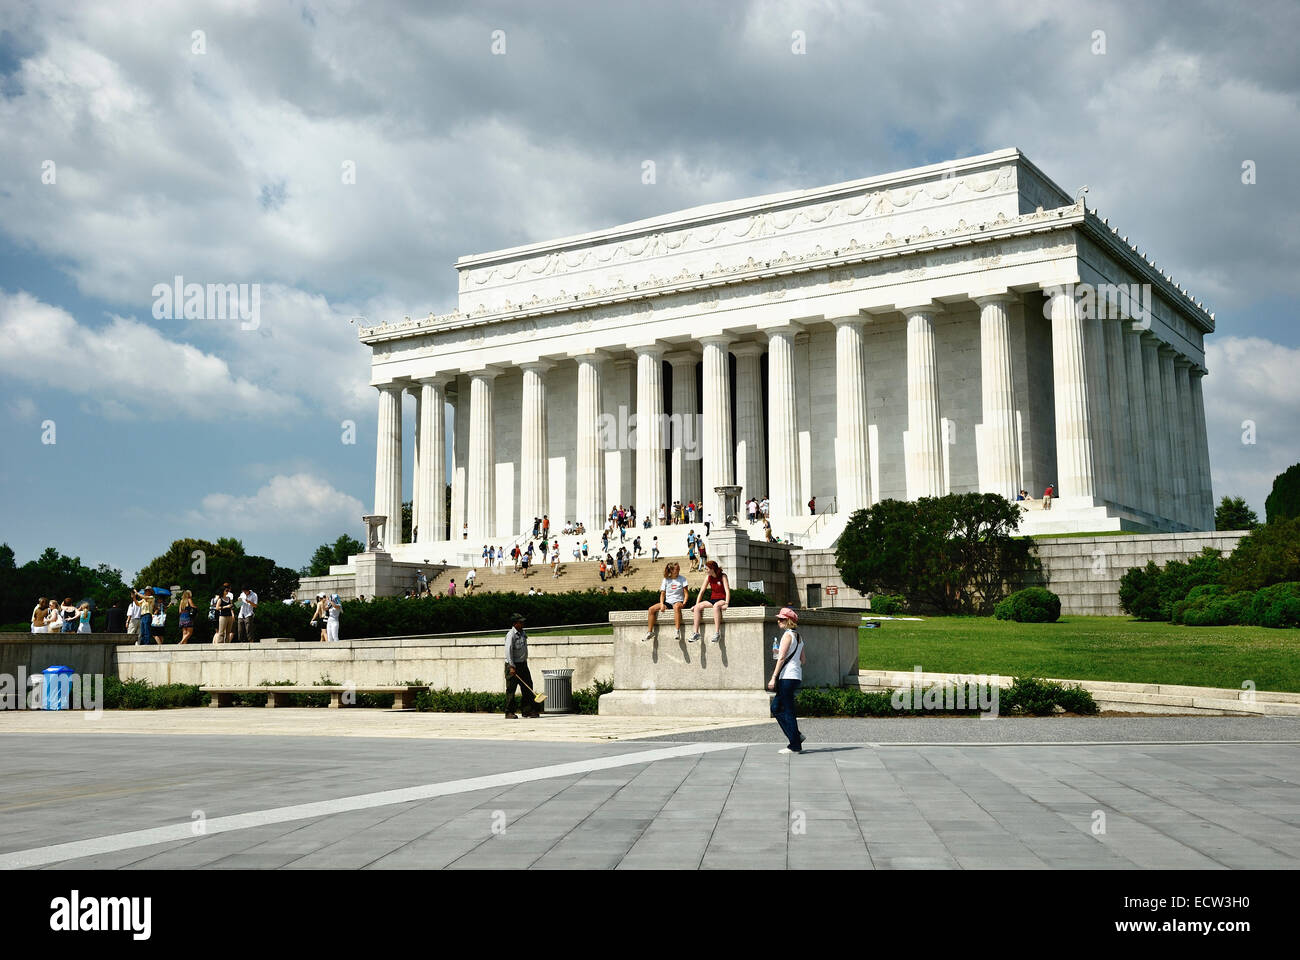 Lincoln Memorial is an American memorial built to honor the 16th President of the United States, Abraham Lincoln. Stock Photo